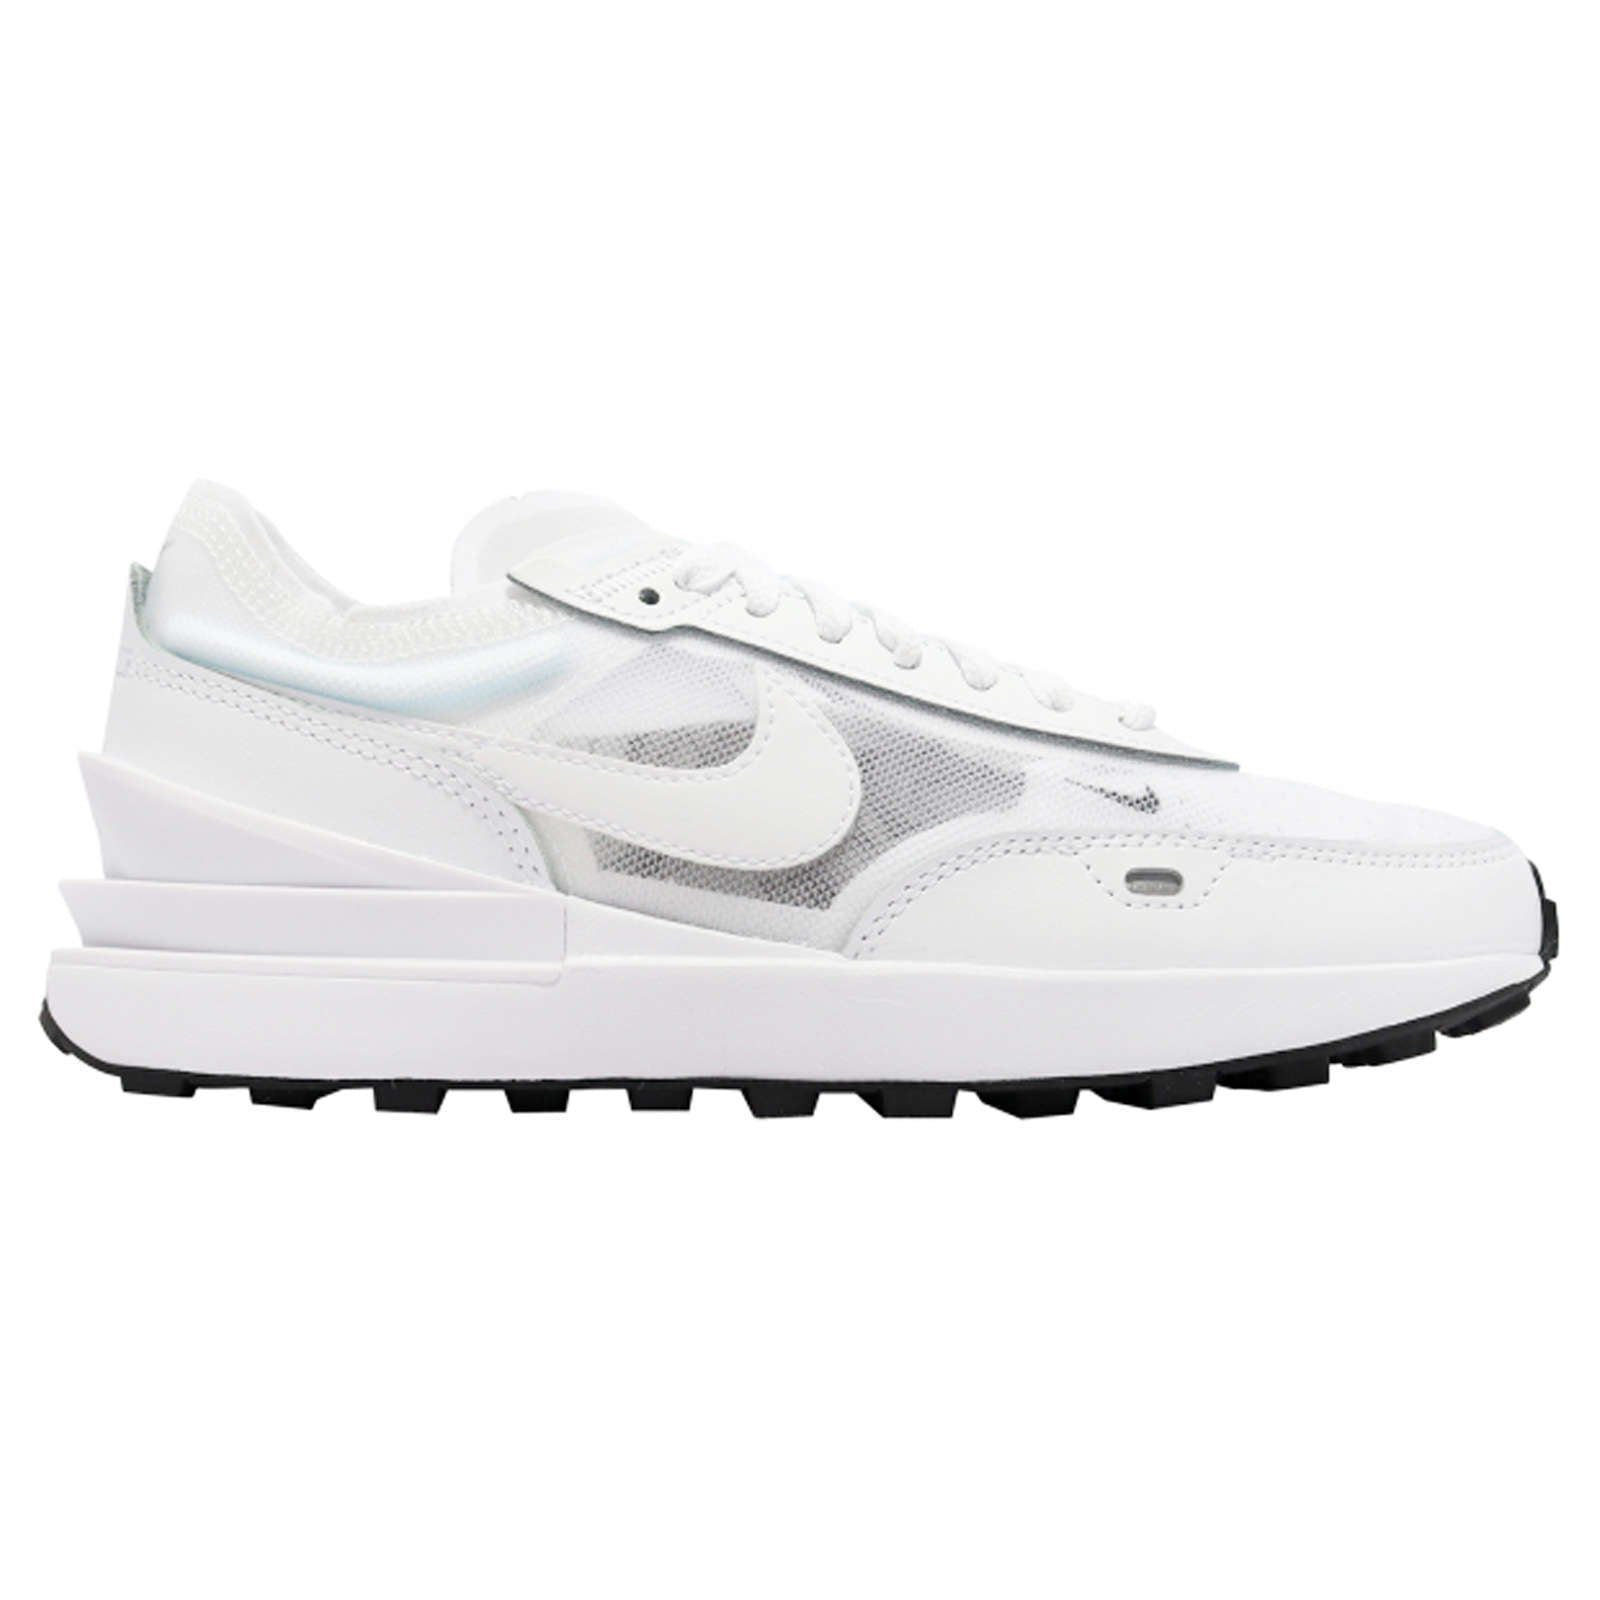 Nike Waffle One Leather Textile Women's Low-Top Sneakers#color_white white black